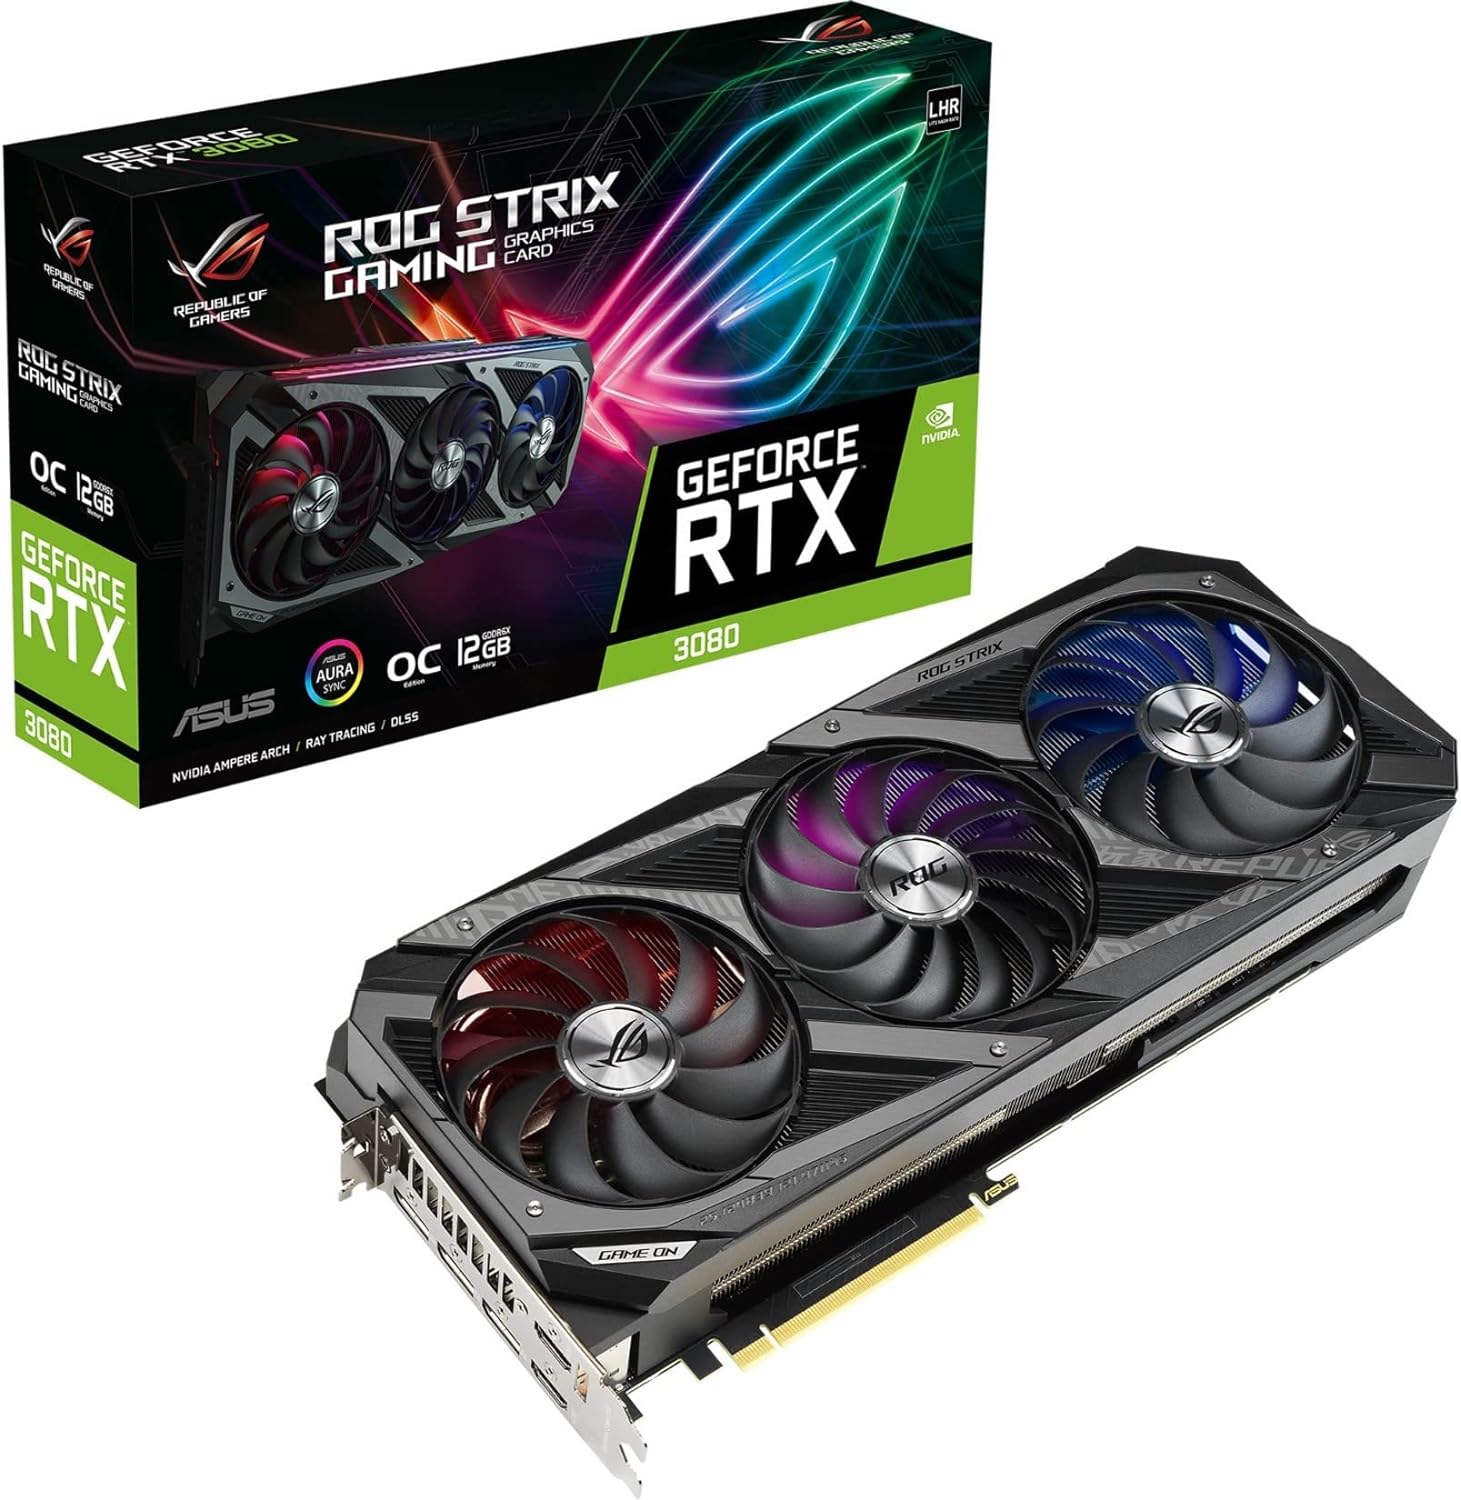 ASUS ROG Strix RTX 3080 OC Gaming Card: Unleash ultimate gaming power with PCIe 4.0 and 12GB GDDR6X memory. 0195553558082